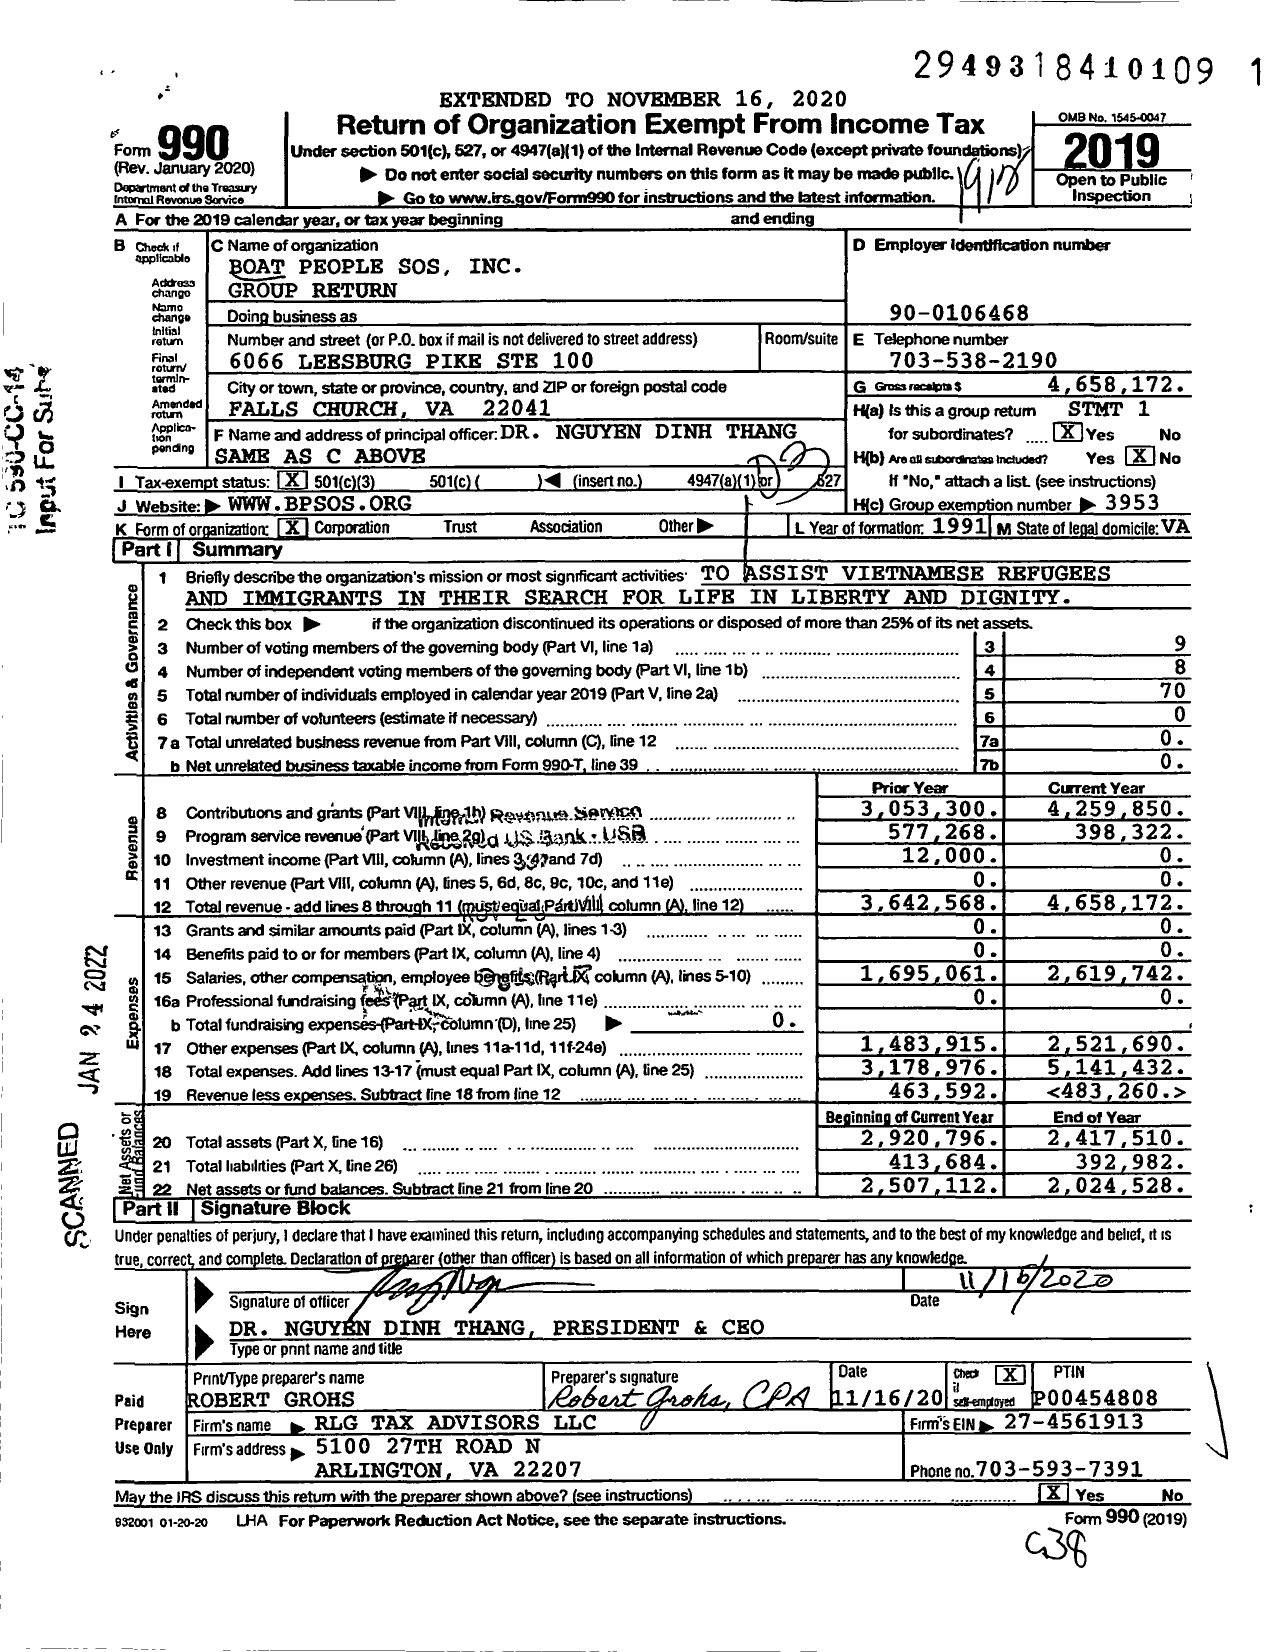 Image of first page of 2019 Form 990 for Boat People SOS / Group Return